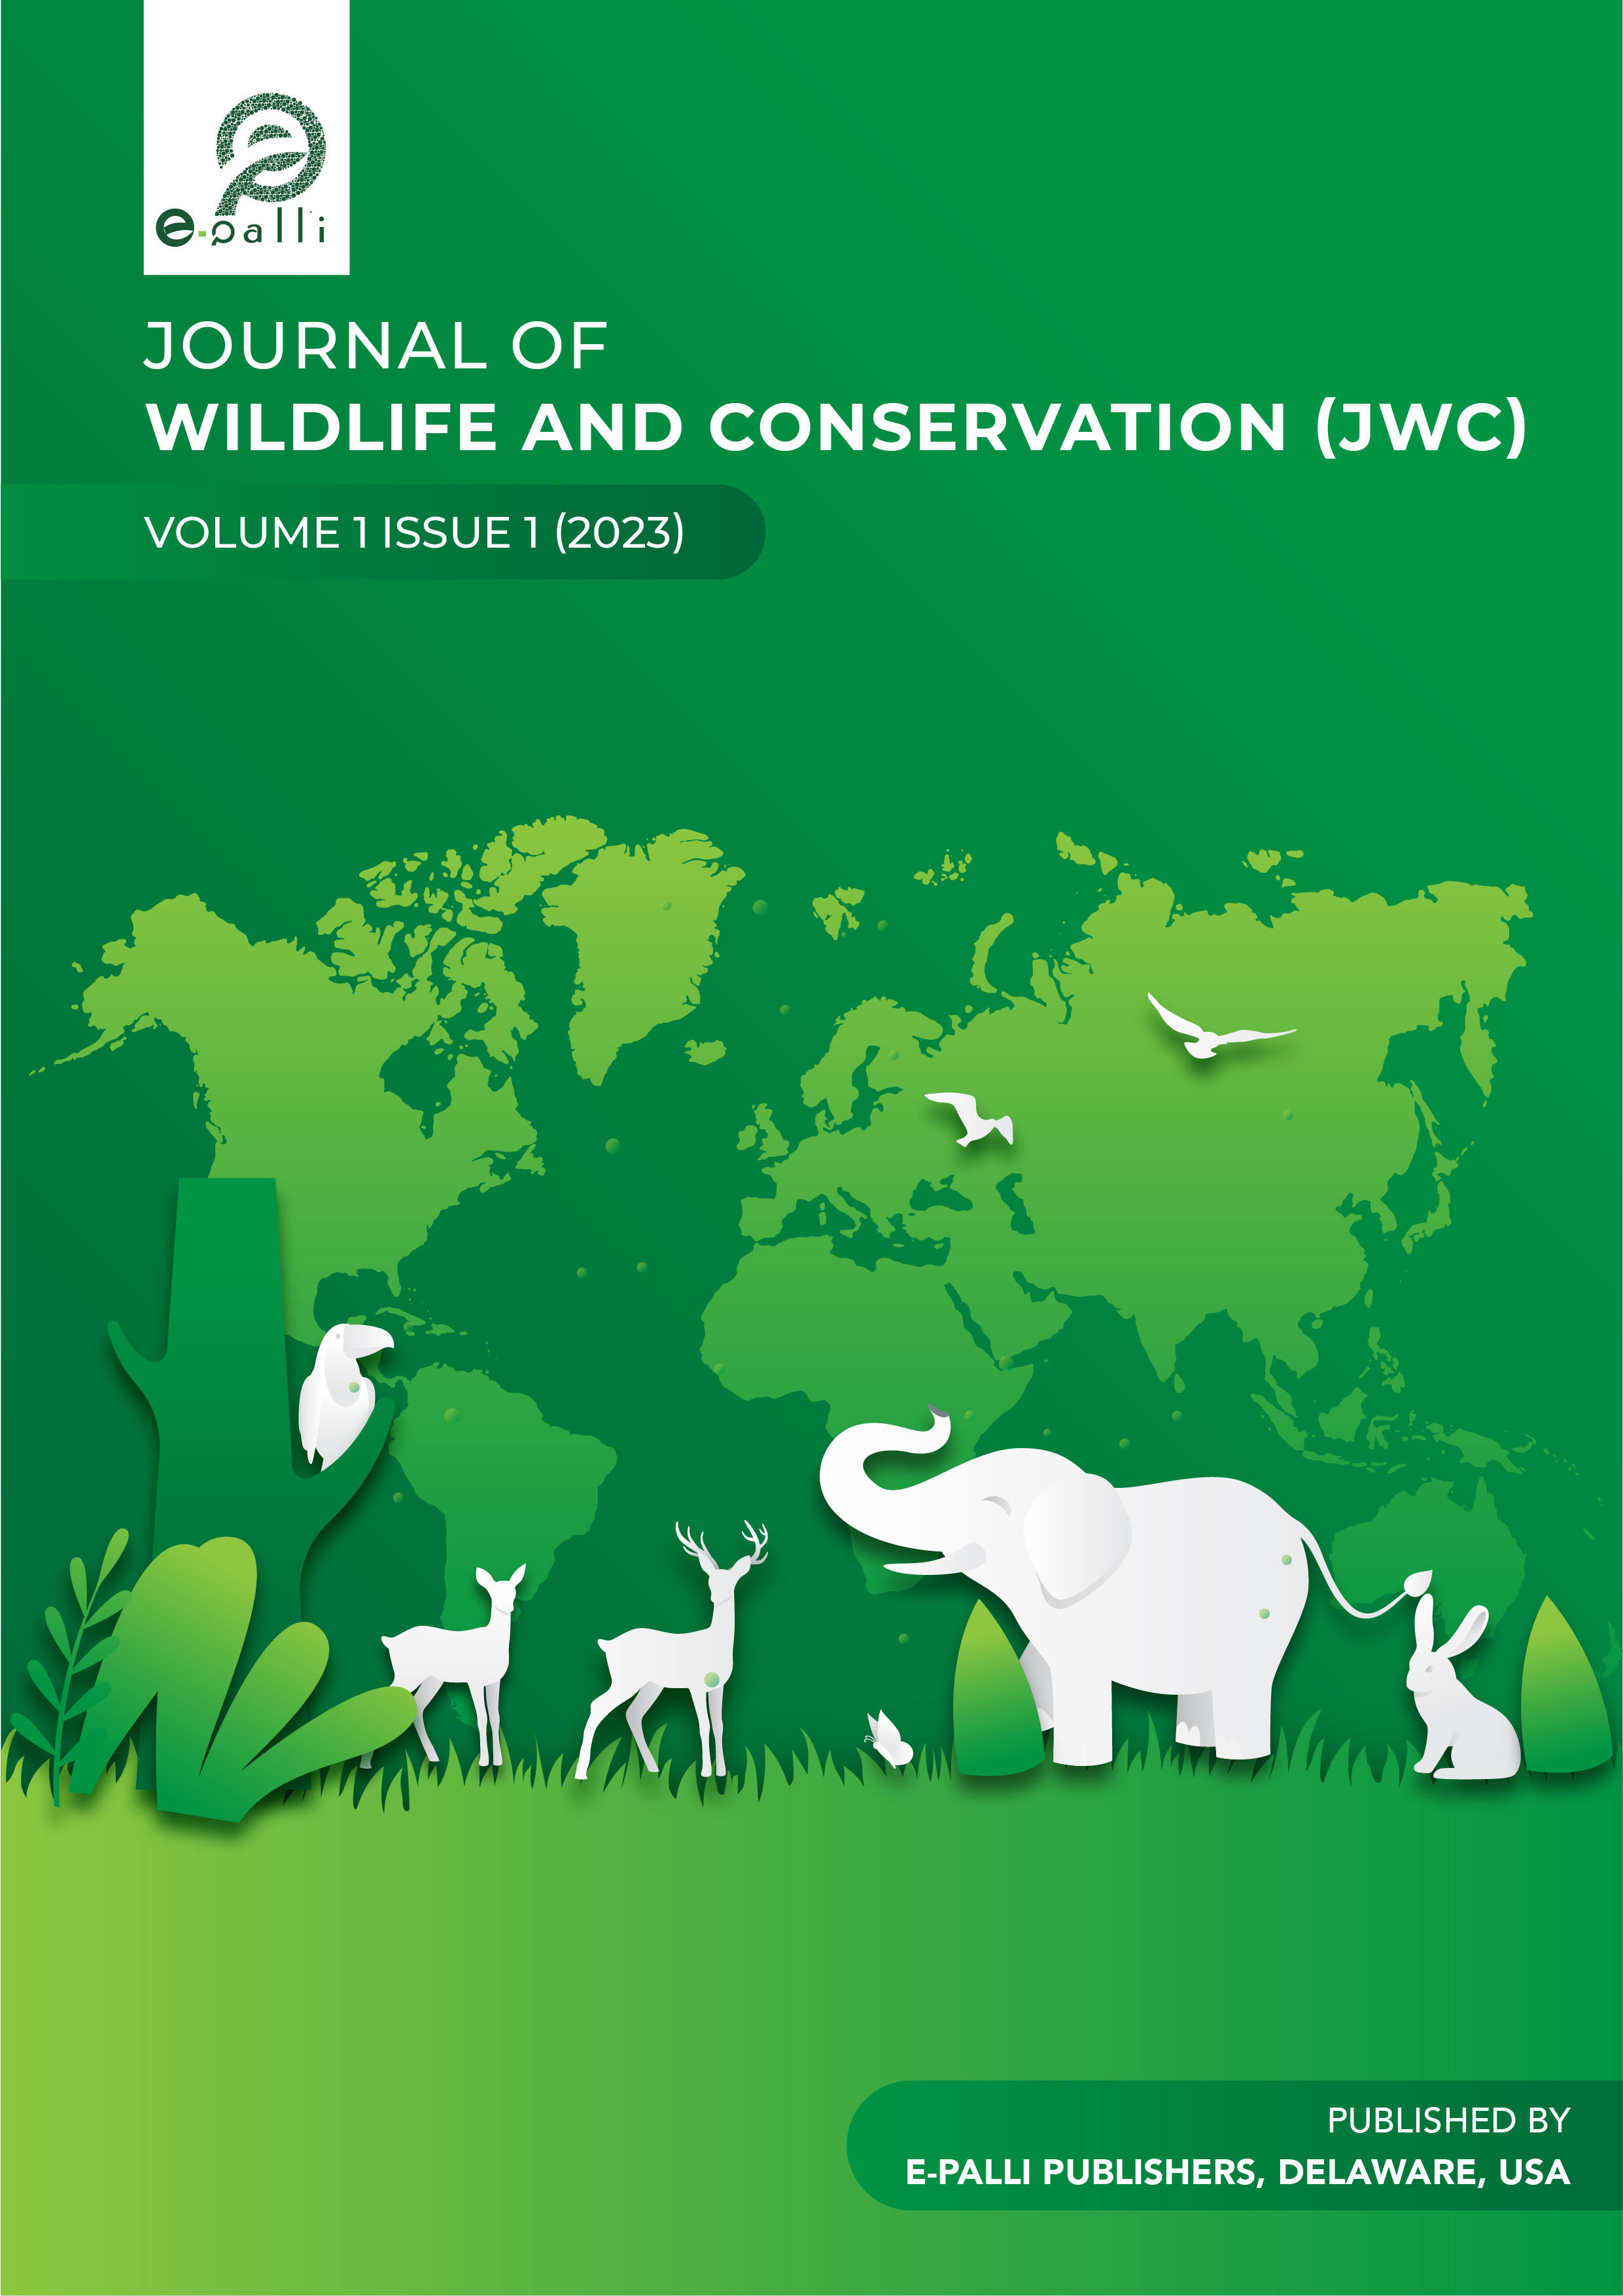 					View Vol. 1 No. 1 (2023): Journal of Wildlife and Conservation
				